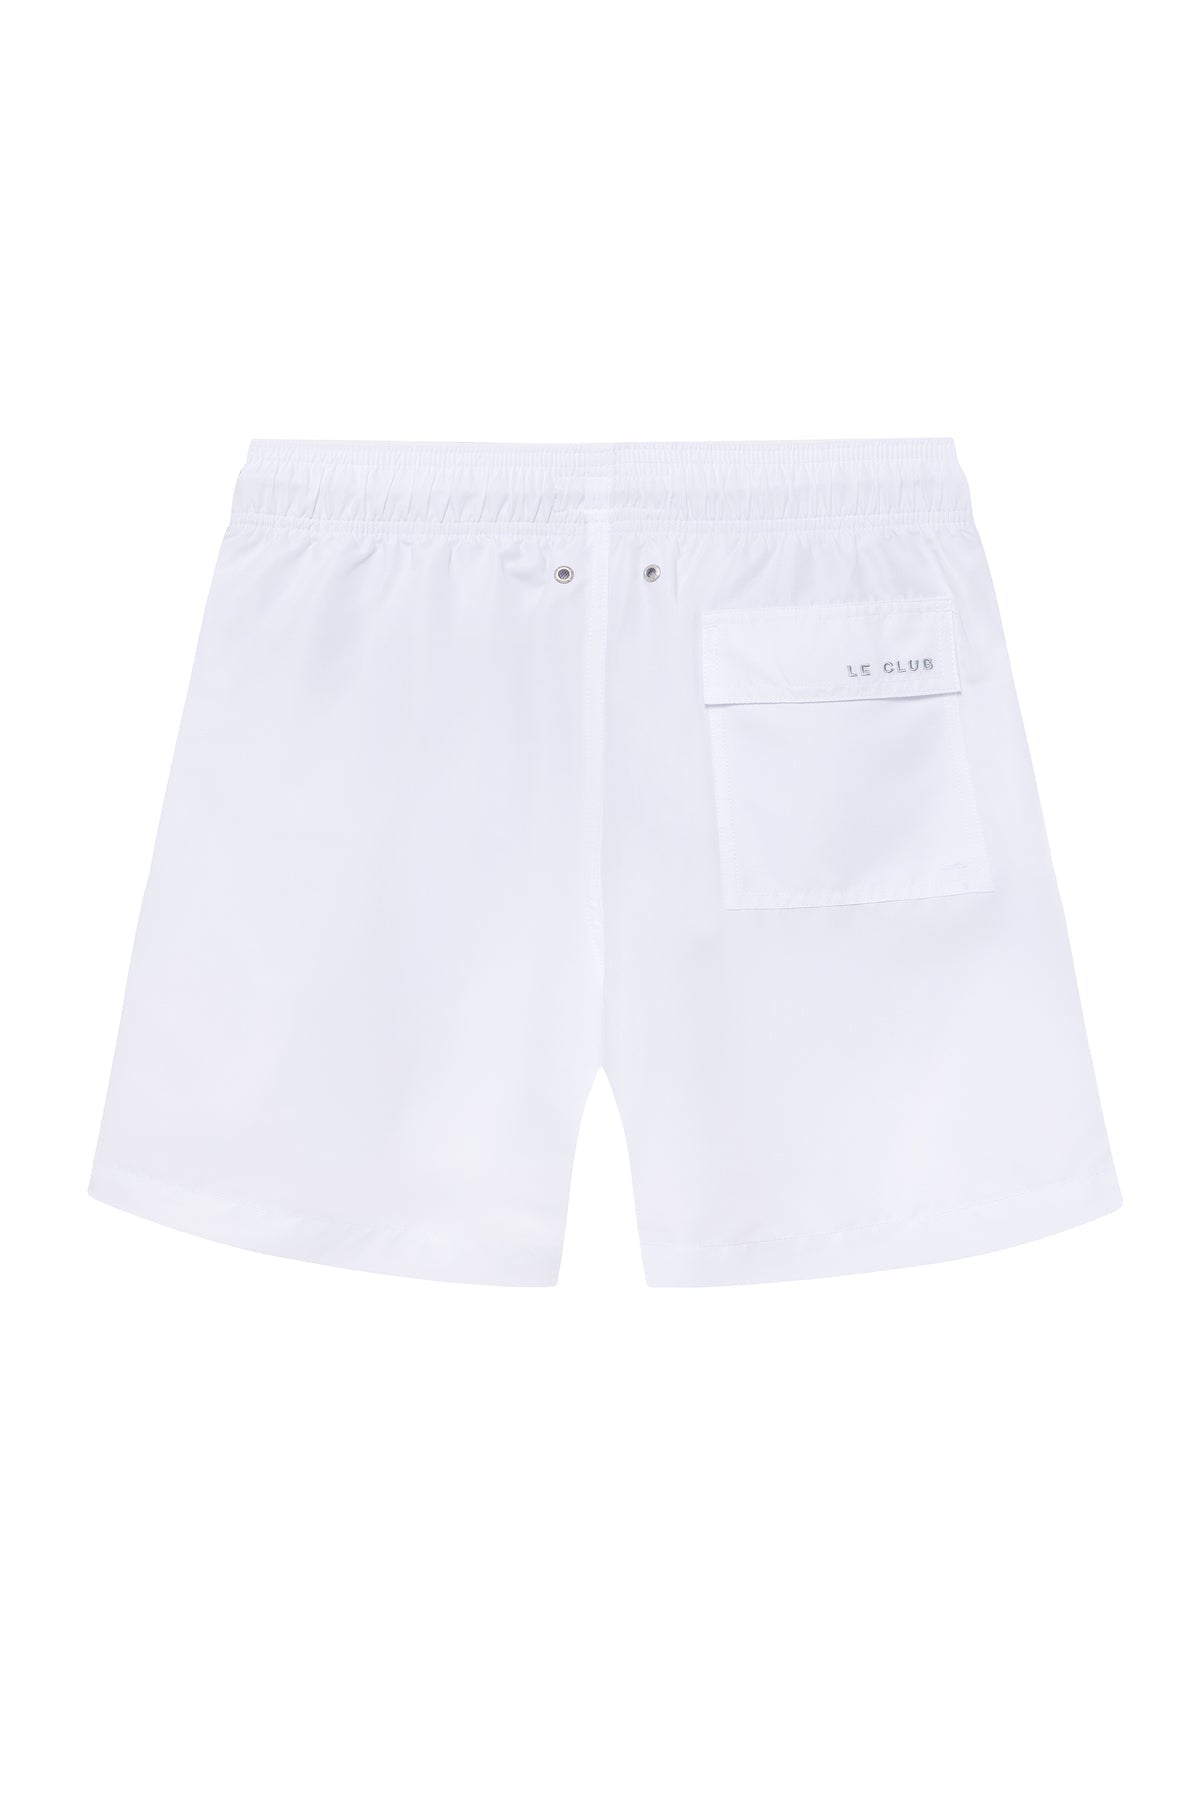 Load image into Gallery viewer, Le Club Apparel &amp;amp; Accessories &amp;gt; Clothing &amp;gt; Shorts Club Men&amp;#39;s Swim Trunk Classic White 2022 Le Club Men&amp;#39;s Swim Trunk Classic White
